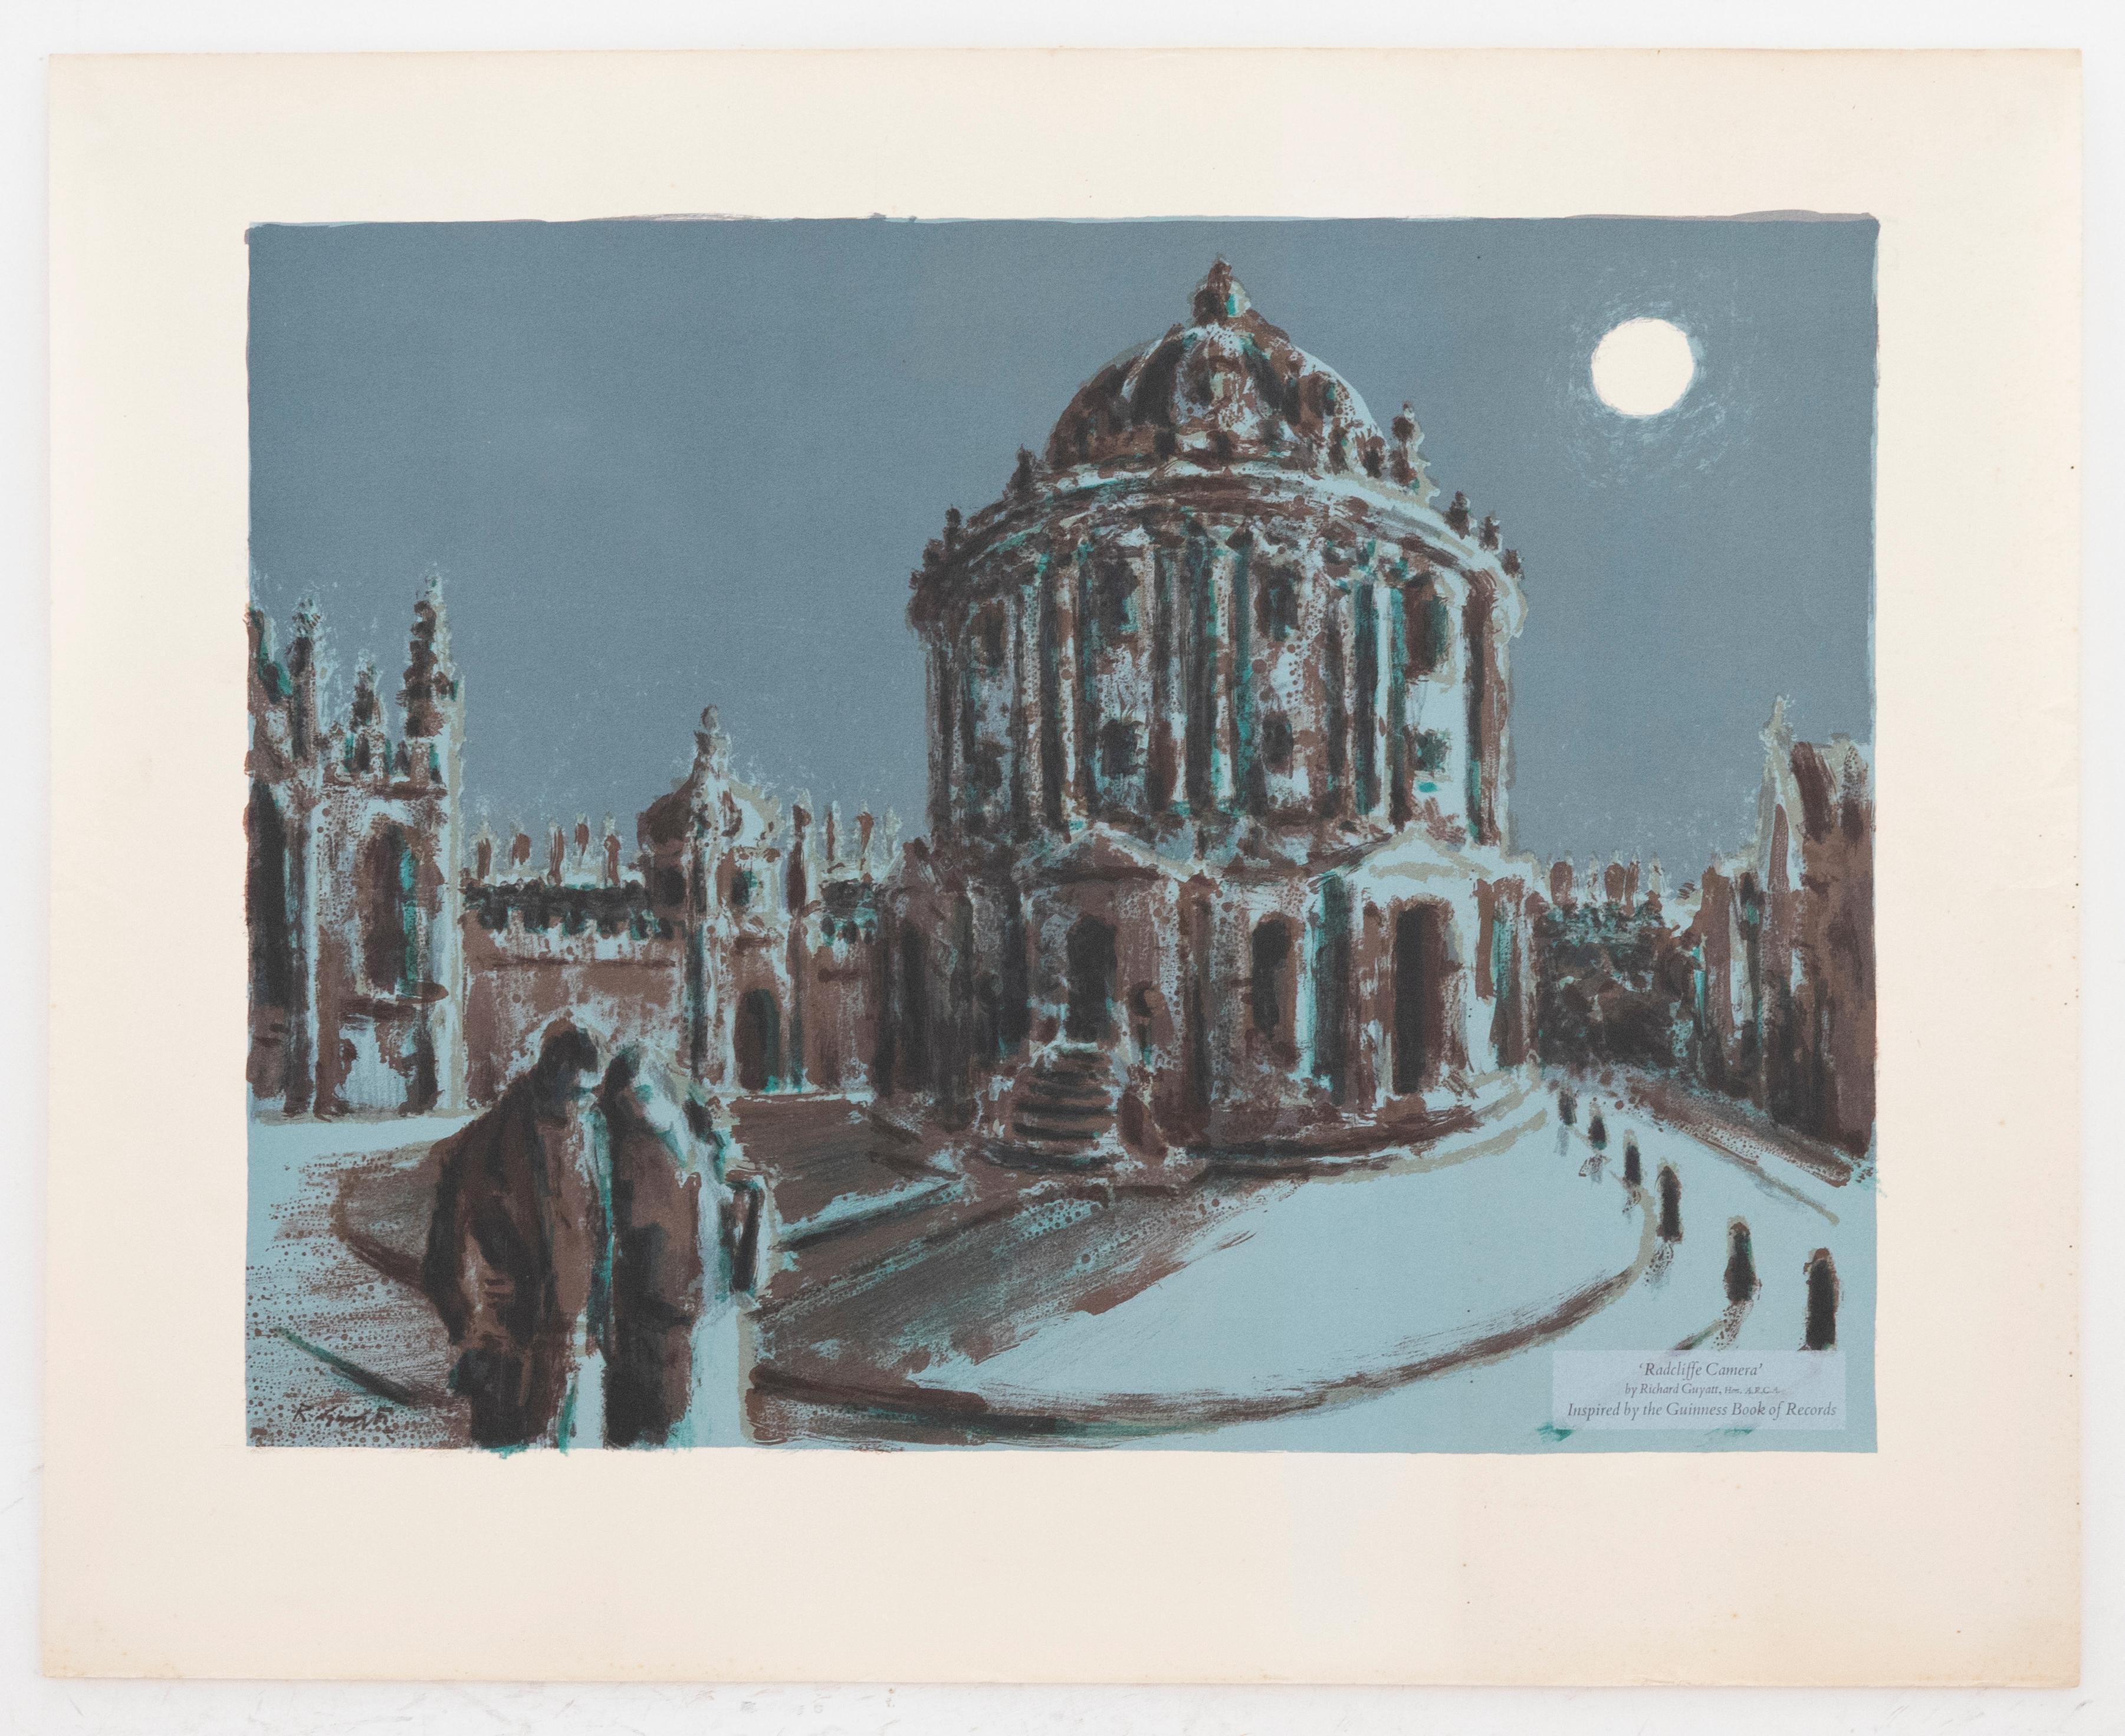 Richard Guyatt ARCA (1914-2007) - 1962 Lithograph Poster, Radcliffe Camera - Print by Unknown